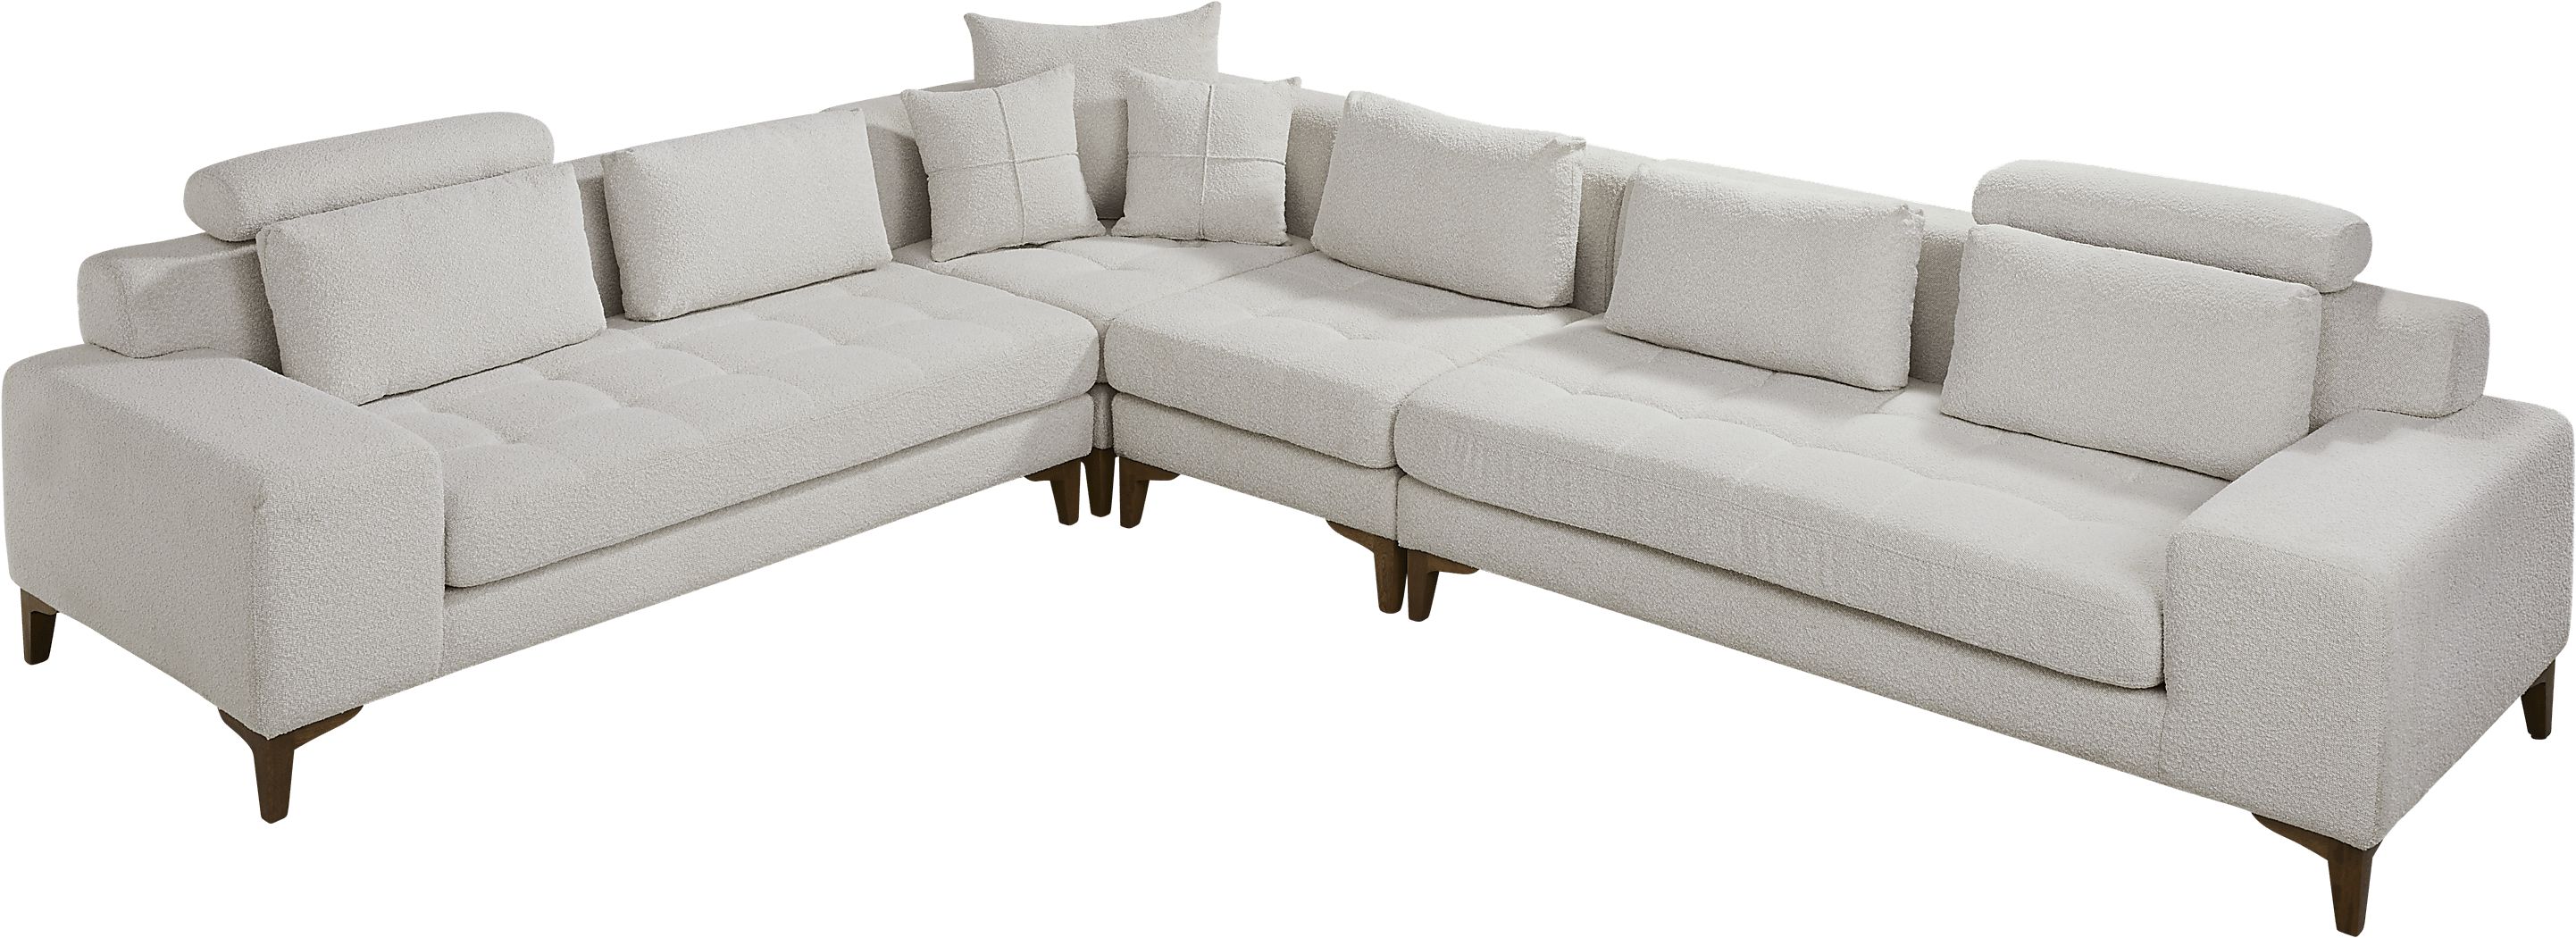 Mercer Place White 4 Pc Sectional